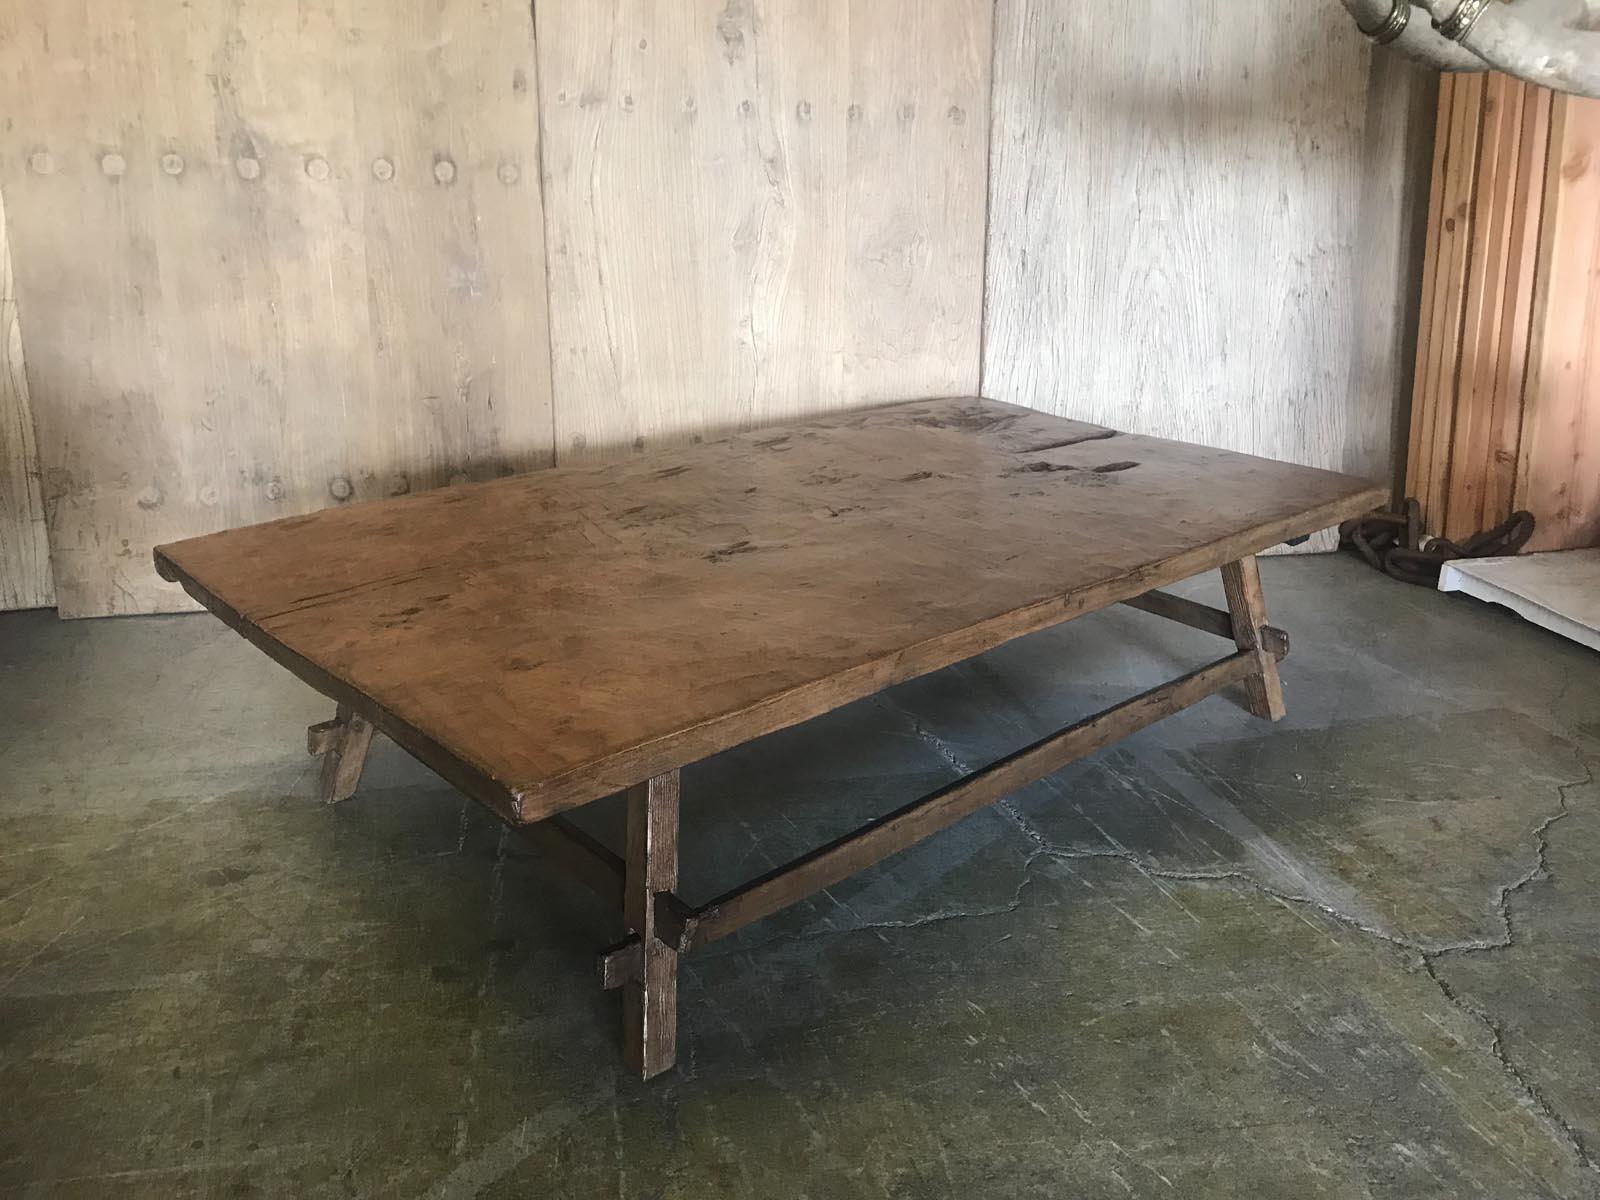 This coffee table consists of an antique one wide board. It is hand hewn and shows age appropriate wear. The top is slightly warped but it does not take away from its functionality. The base is contemporary and finished to match the top. Great